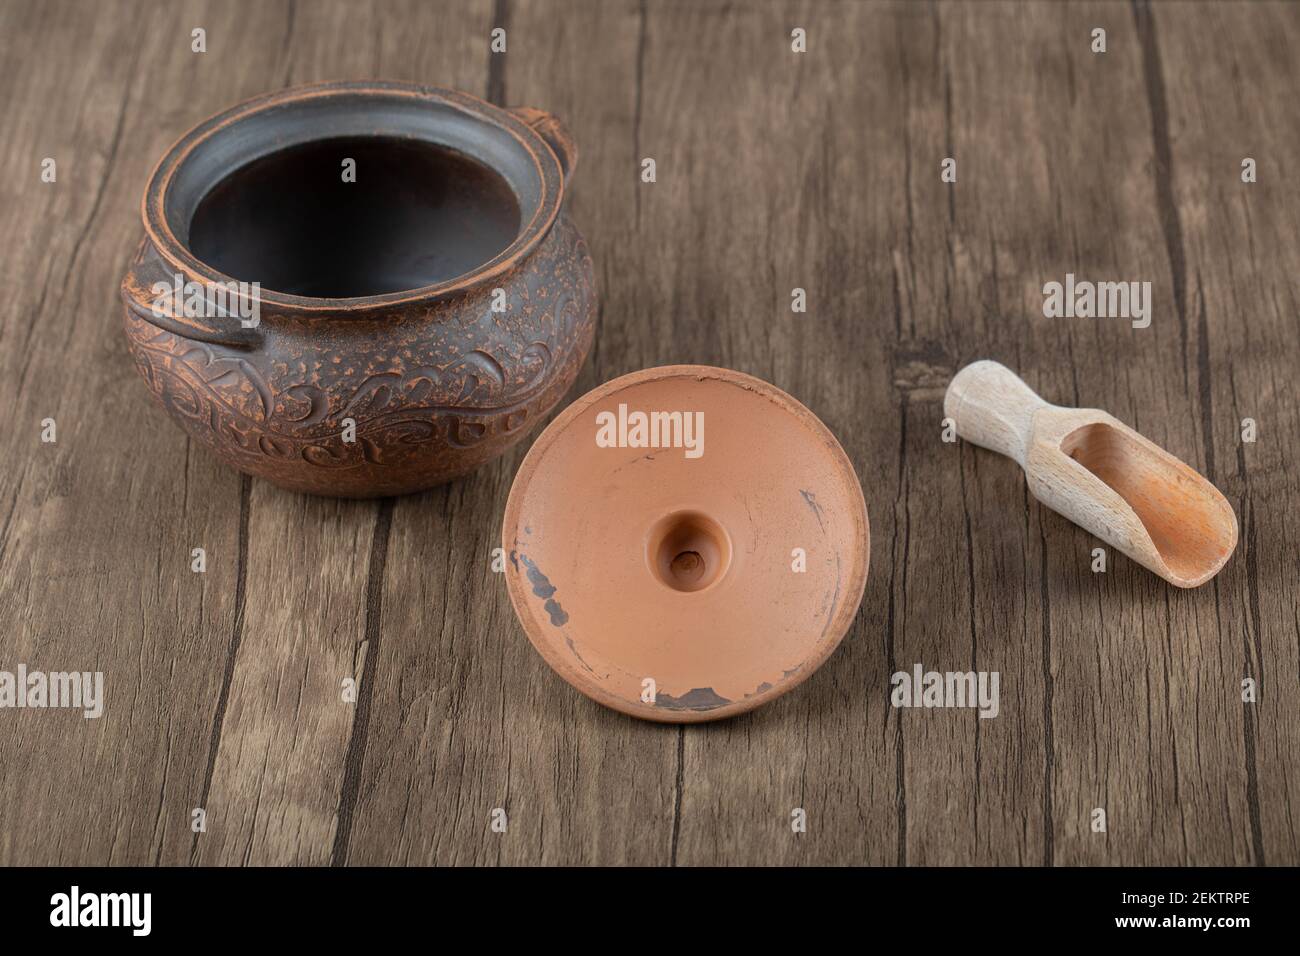 Ancient pot with a wooden spoon on a wooden table Stock Photo